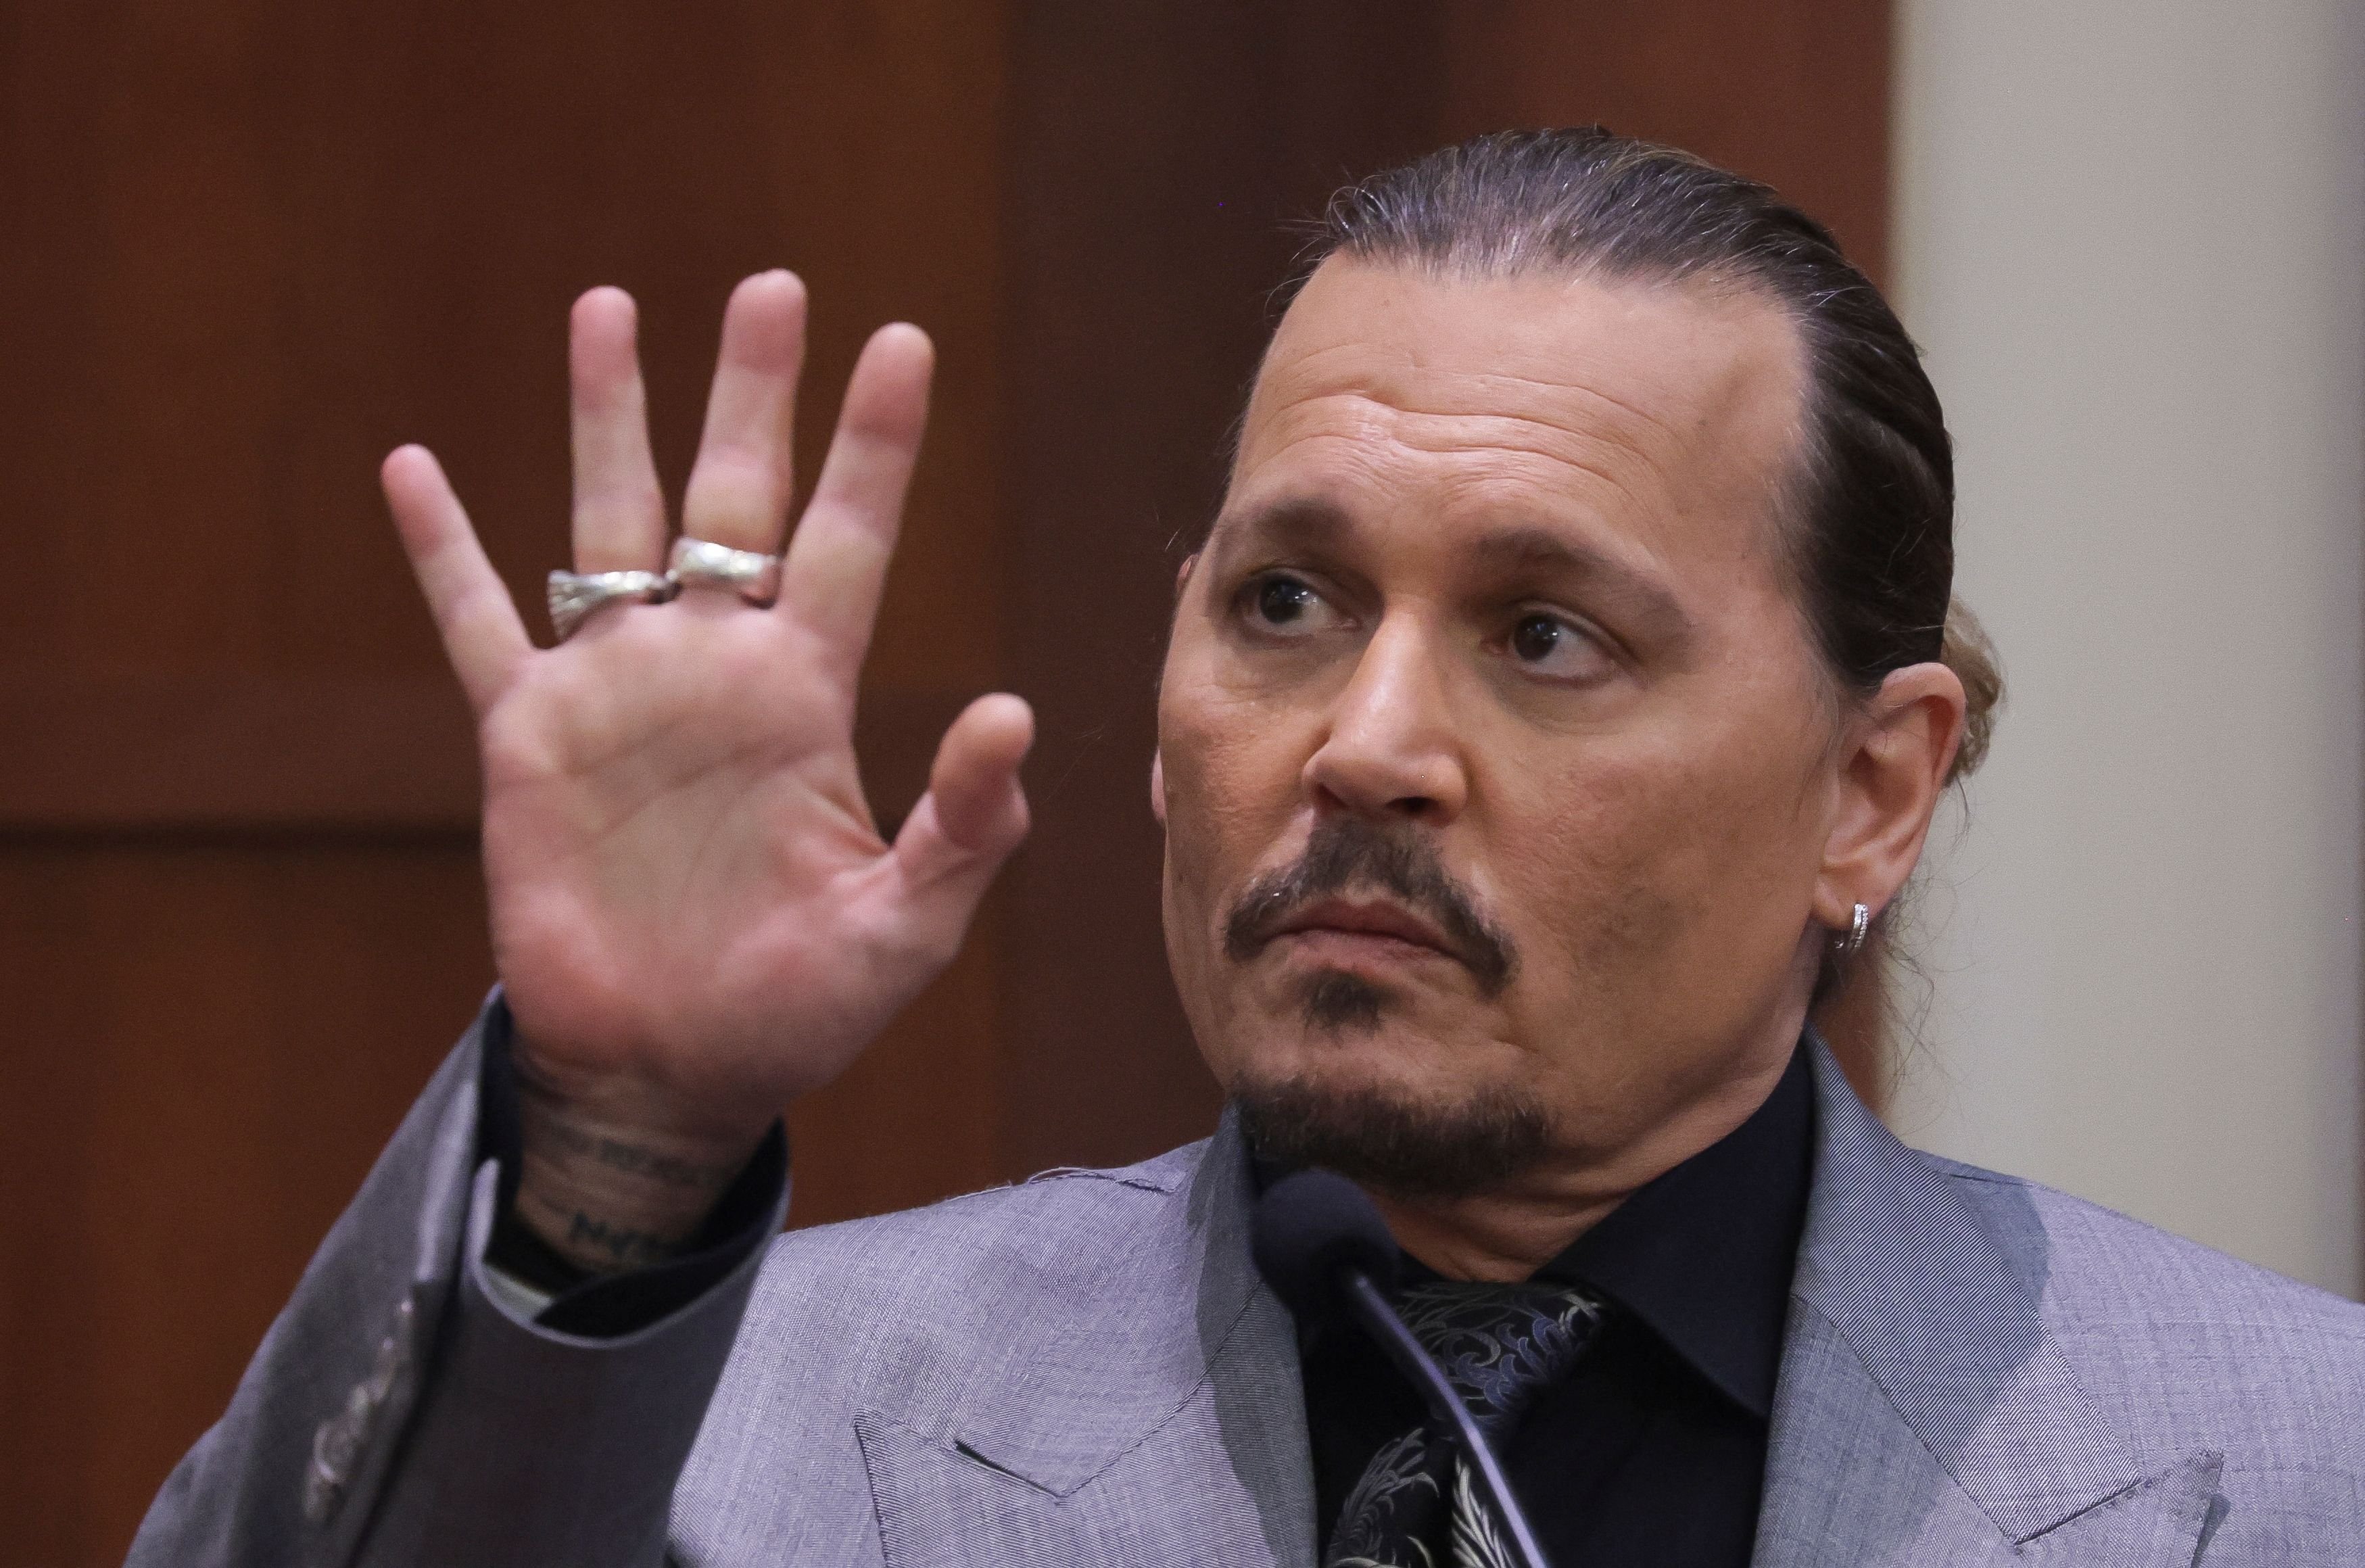 Johnny Depp displays his middle fingertip, which he says he injured while staying at a mansion in Australia with his ex-wife Amber Heard